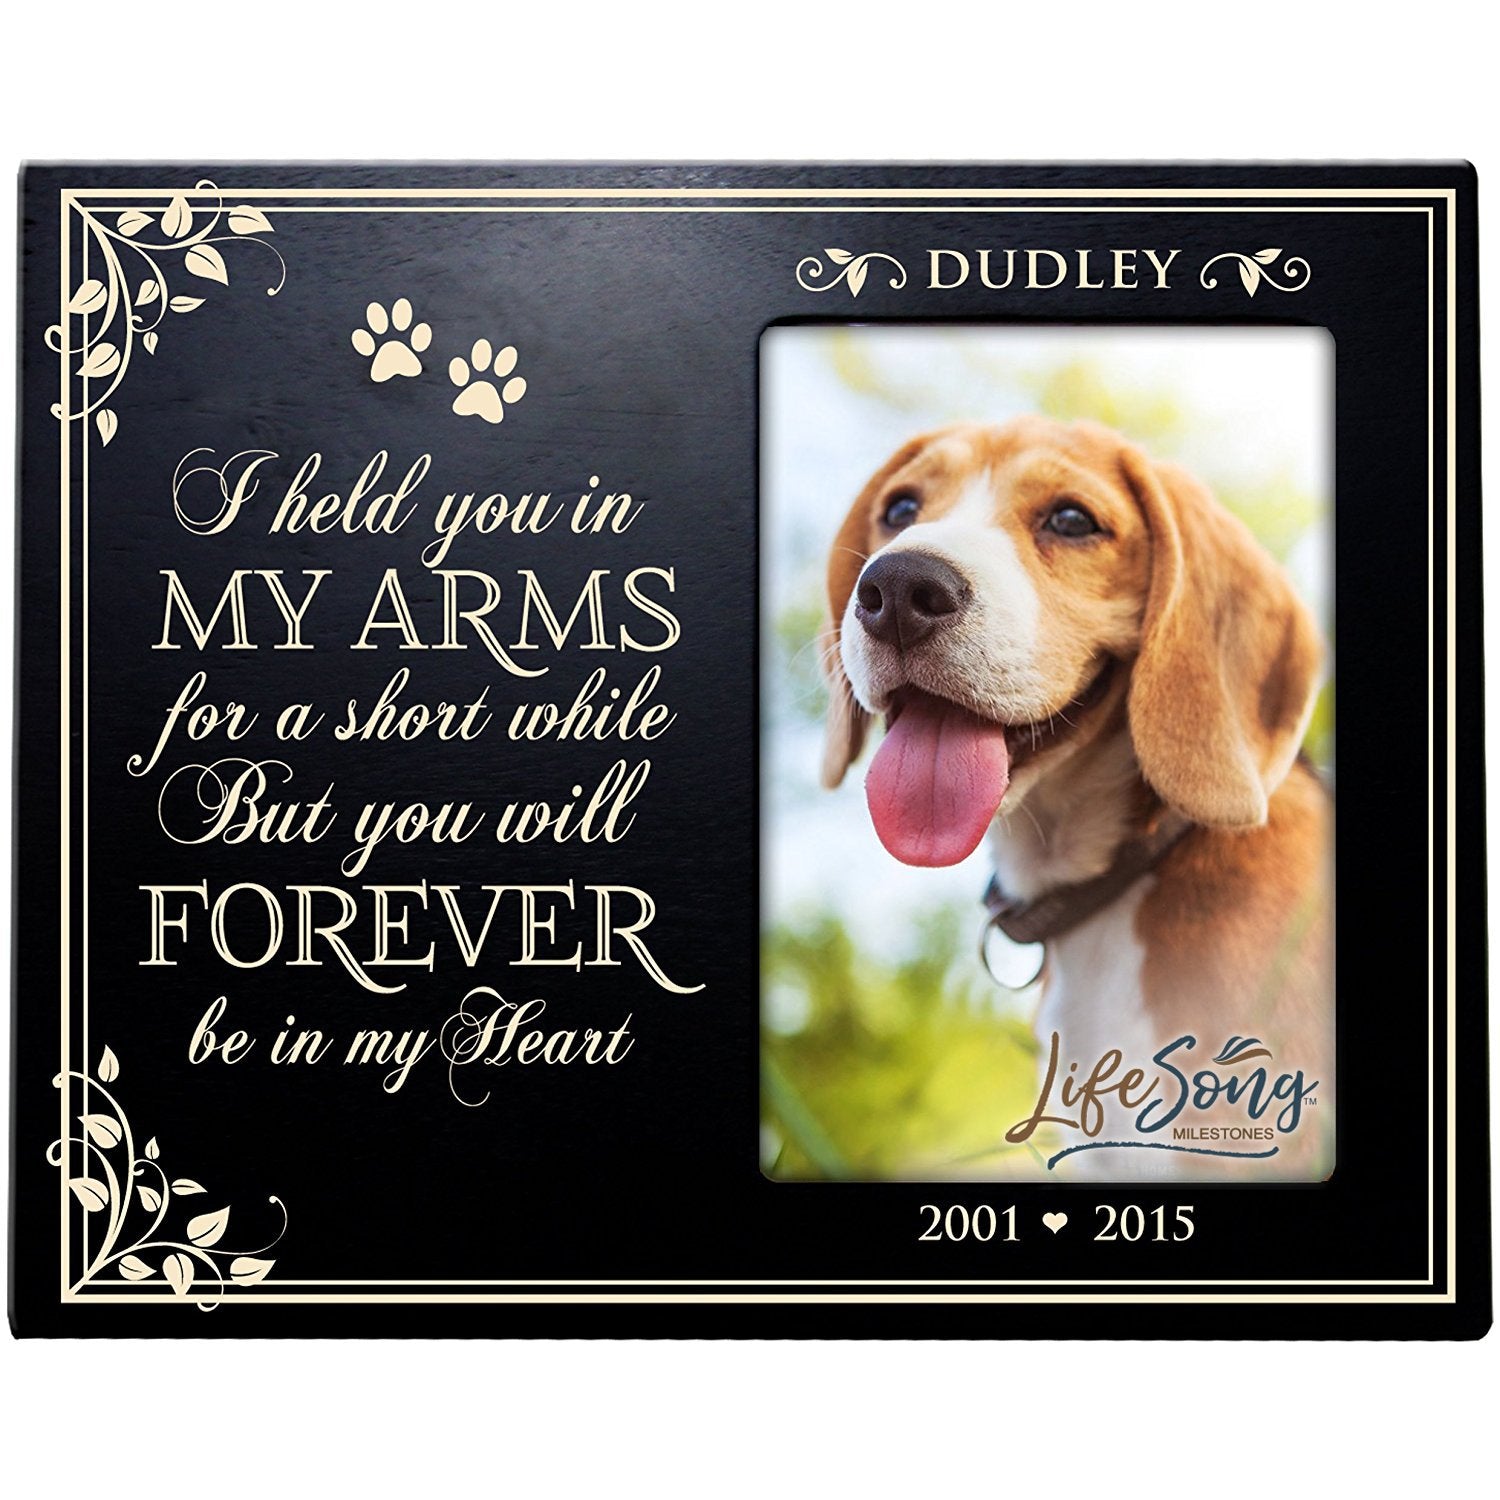 Pet Memorial Picture Frame - I Held You In My Arms - LifeSong Milestones